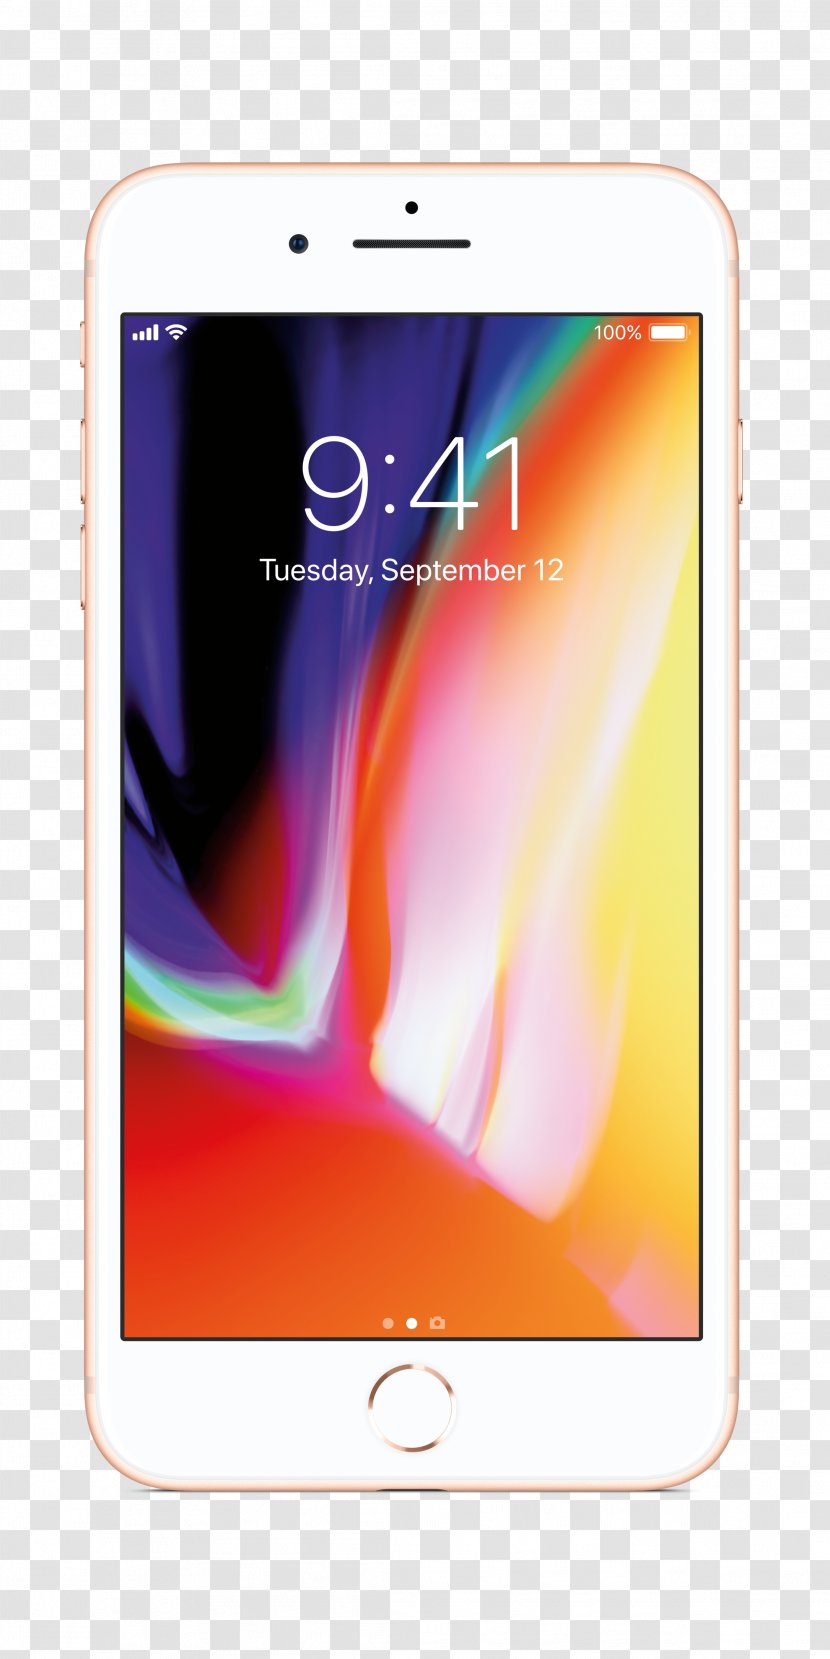 IPhone 8 Plus X Apple Telephone - Smartphone - Iphone8 3d View Transparent PNG